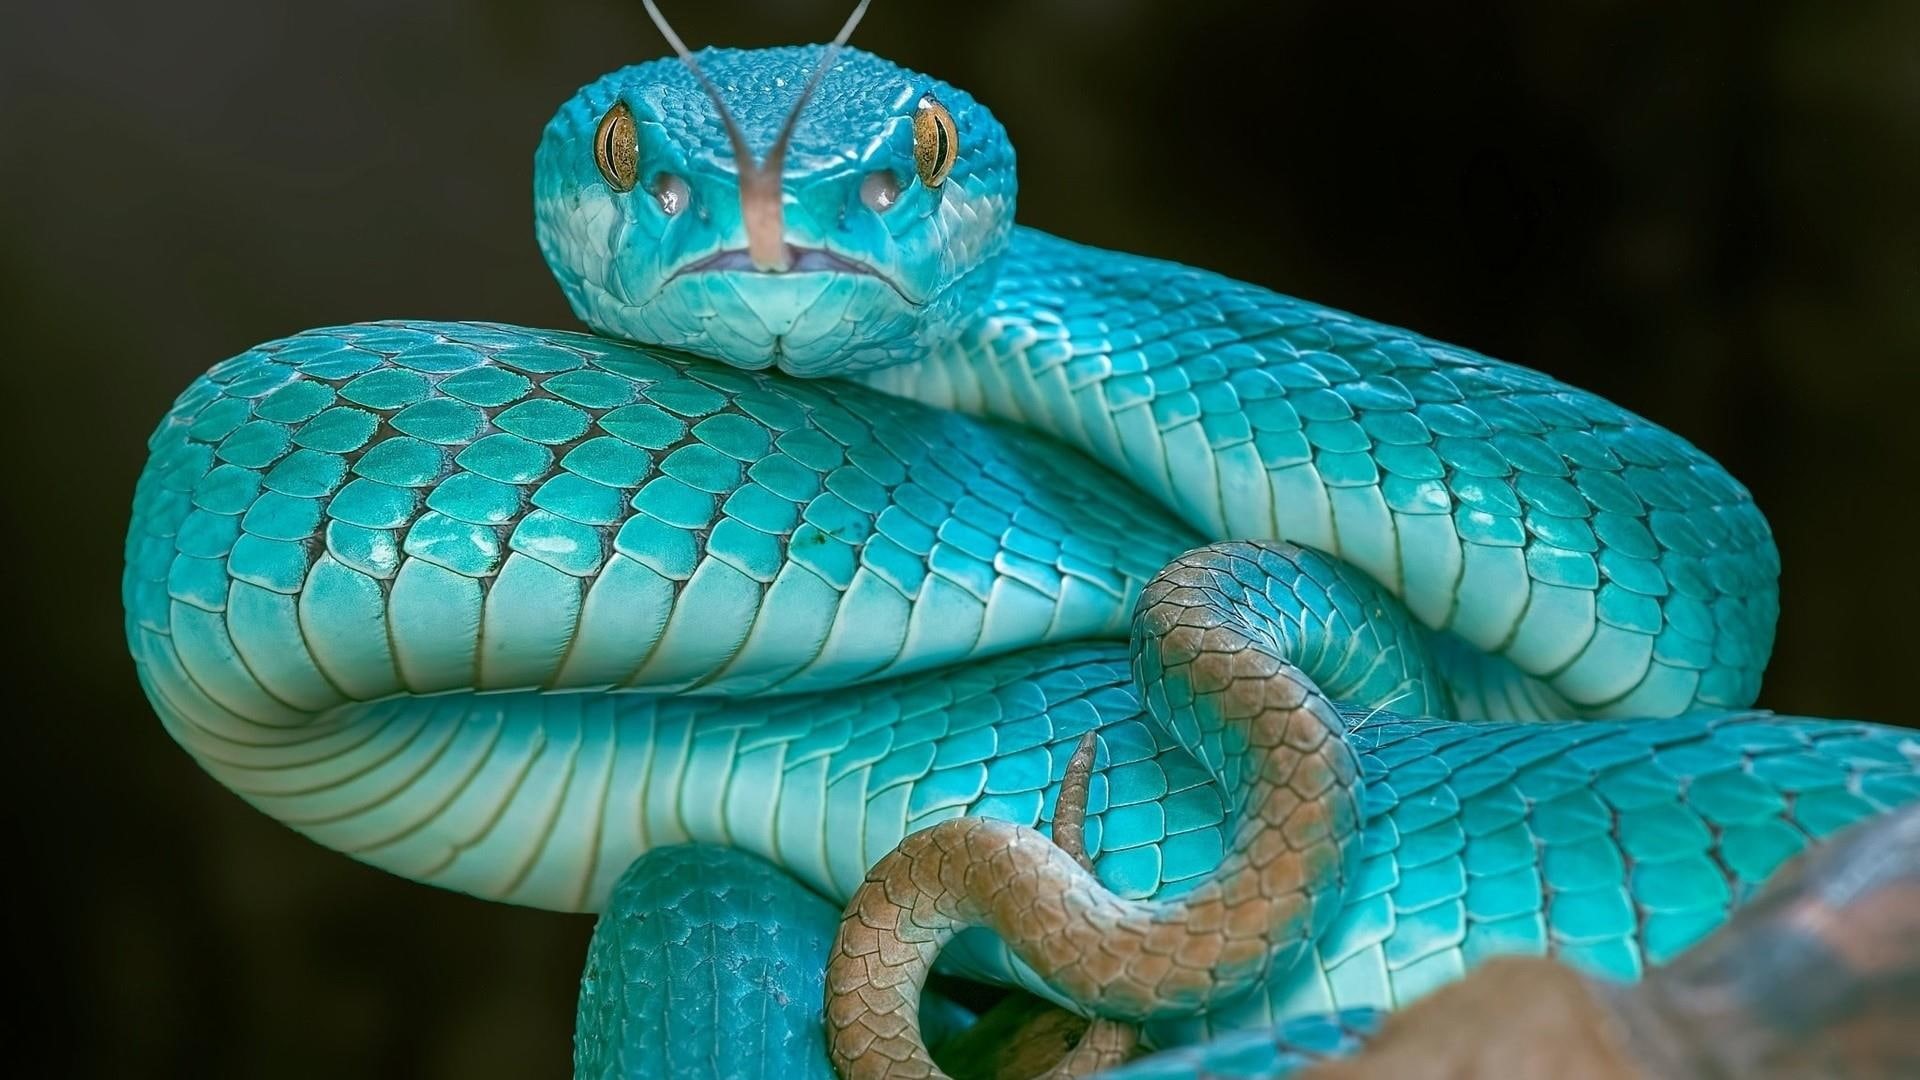 Wallpaper / Close Up, Animal Scale, Animal Body Part, Nature, One Animal, Reptile, 1080P, Focus On Foreground, Pit Viper, Wildlife, Blue Pit Viper, Green Color, Outdoors Free Download